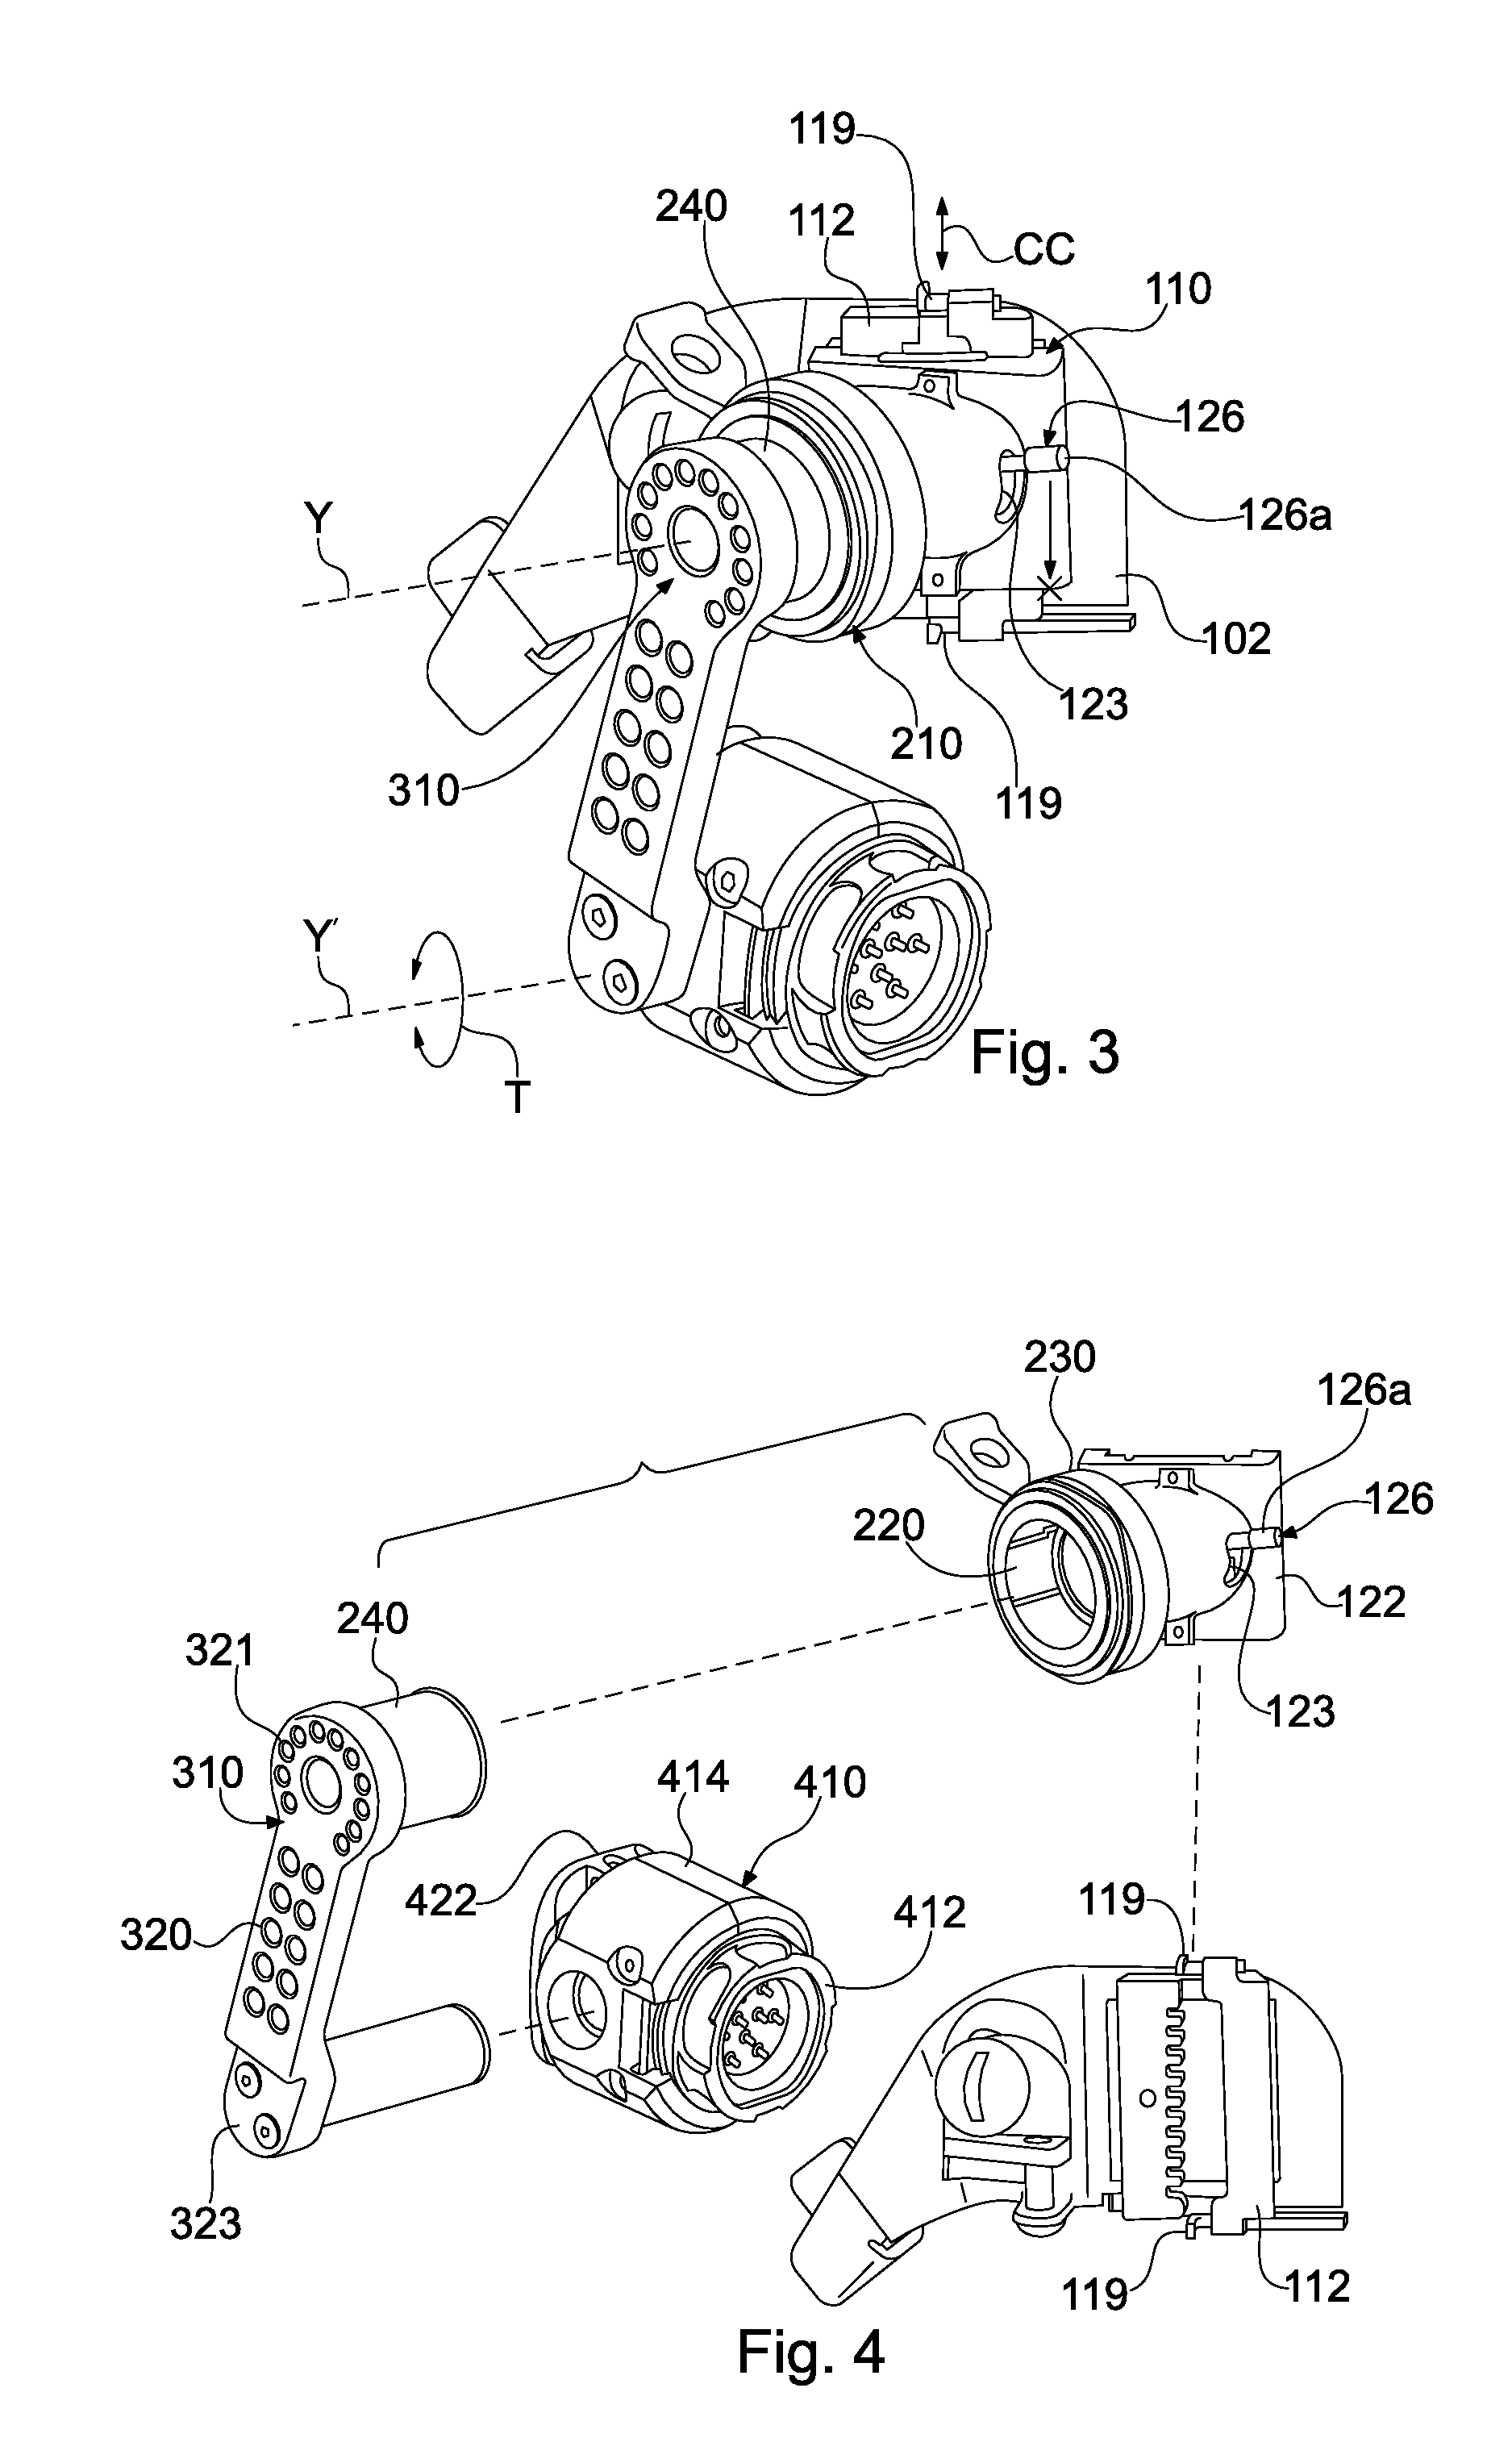 Side positioned vision enhancement device mount